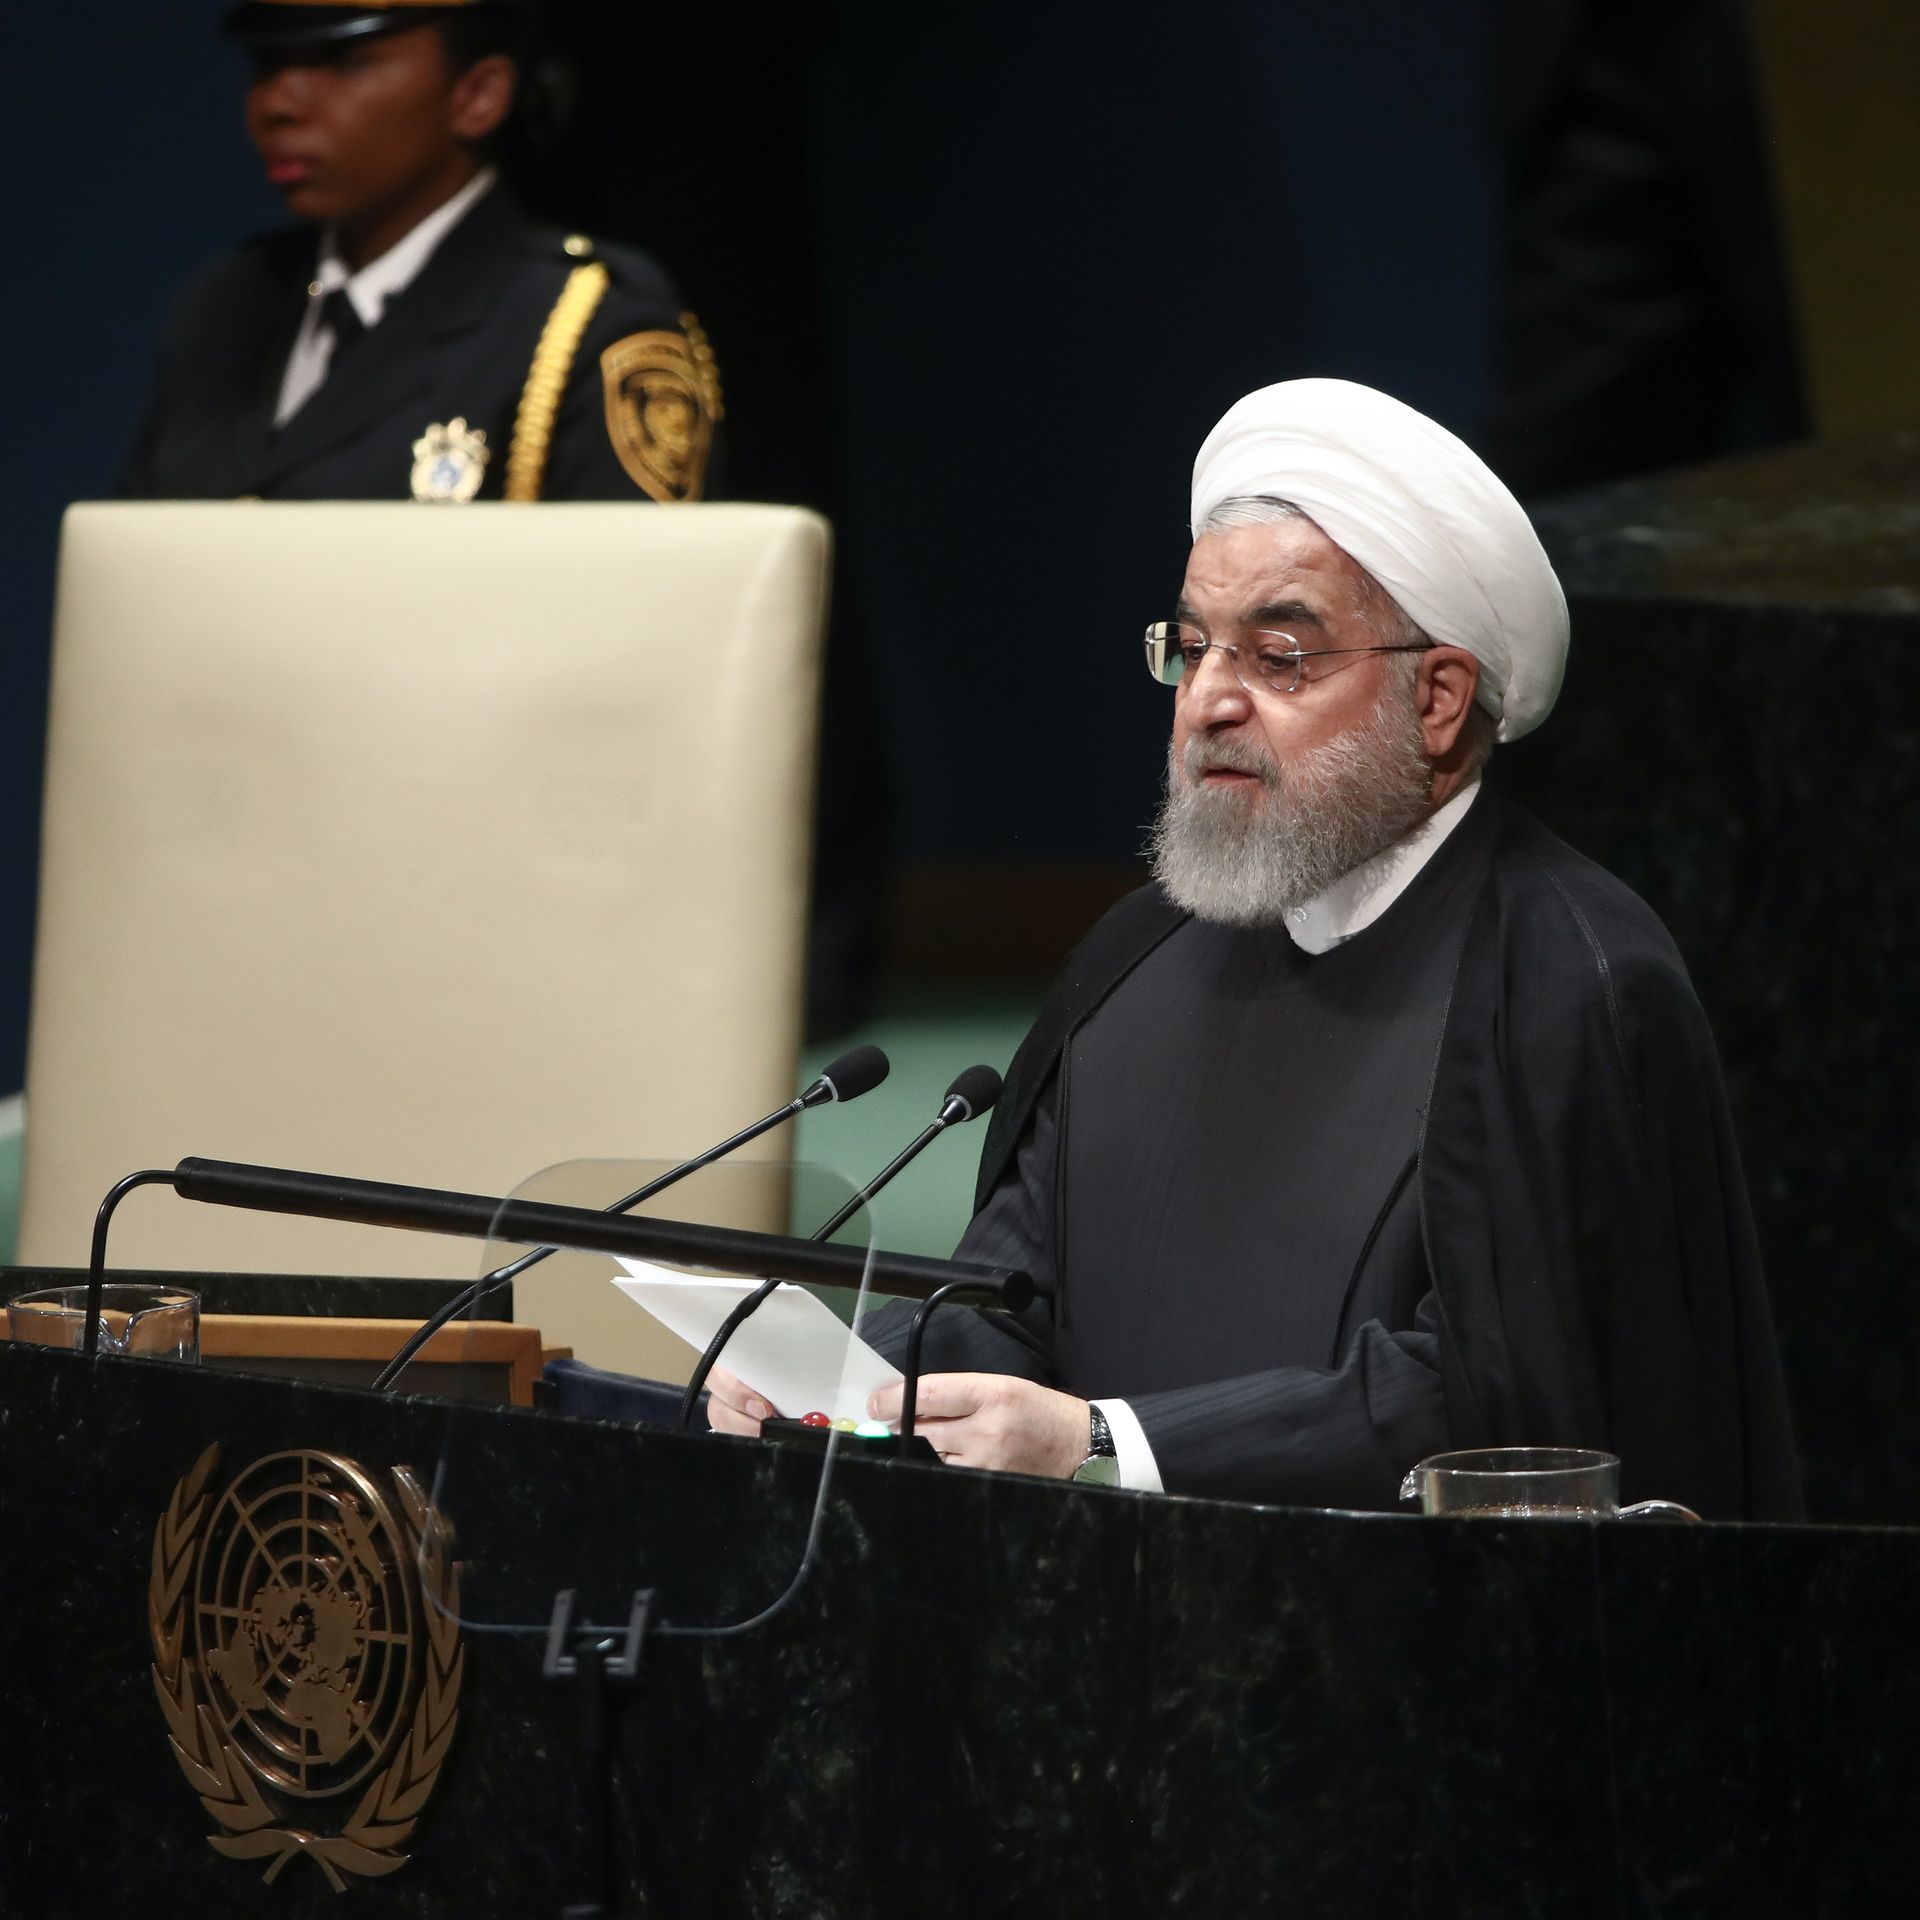 Hassan Rouhani speaking to the United Nations General Assembly from a lectern